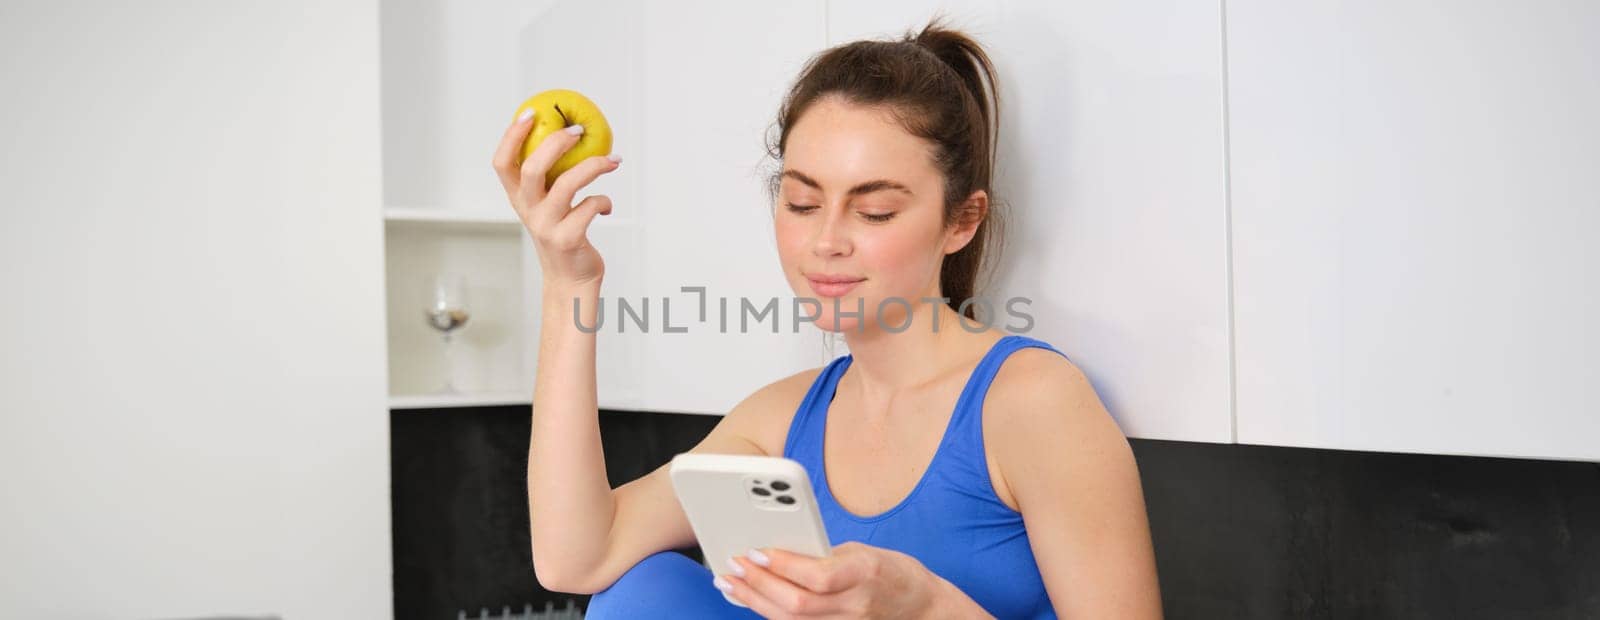 Portrait of brunette fitness woman, eating an apple, holding smartphone, using mobile phone app while having healthy fruit snack in kitchen.